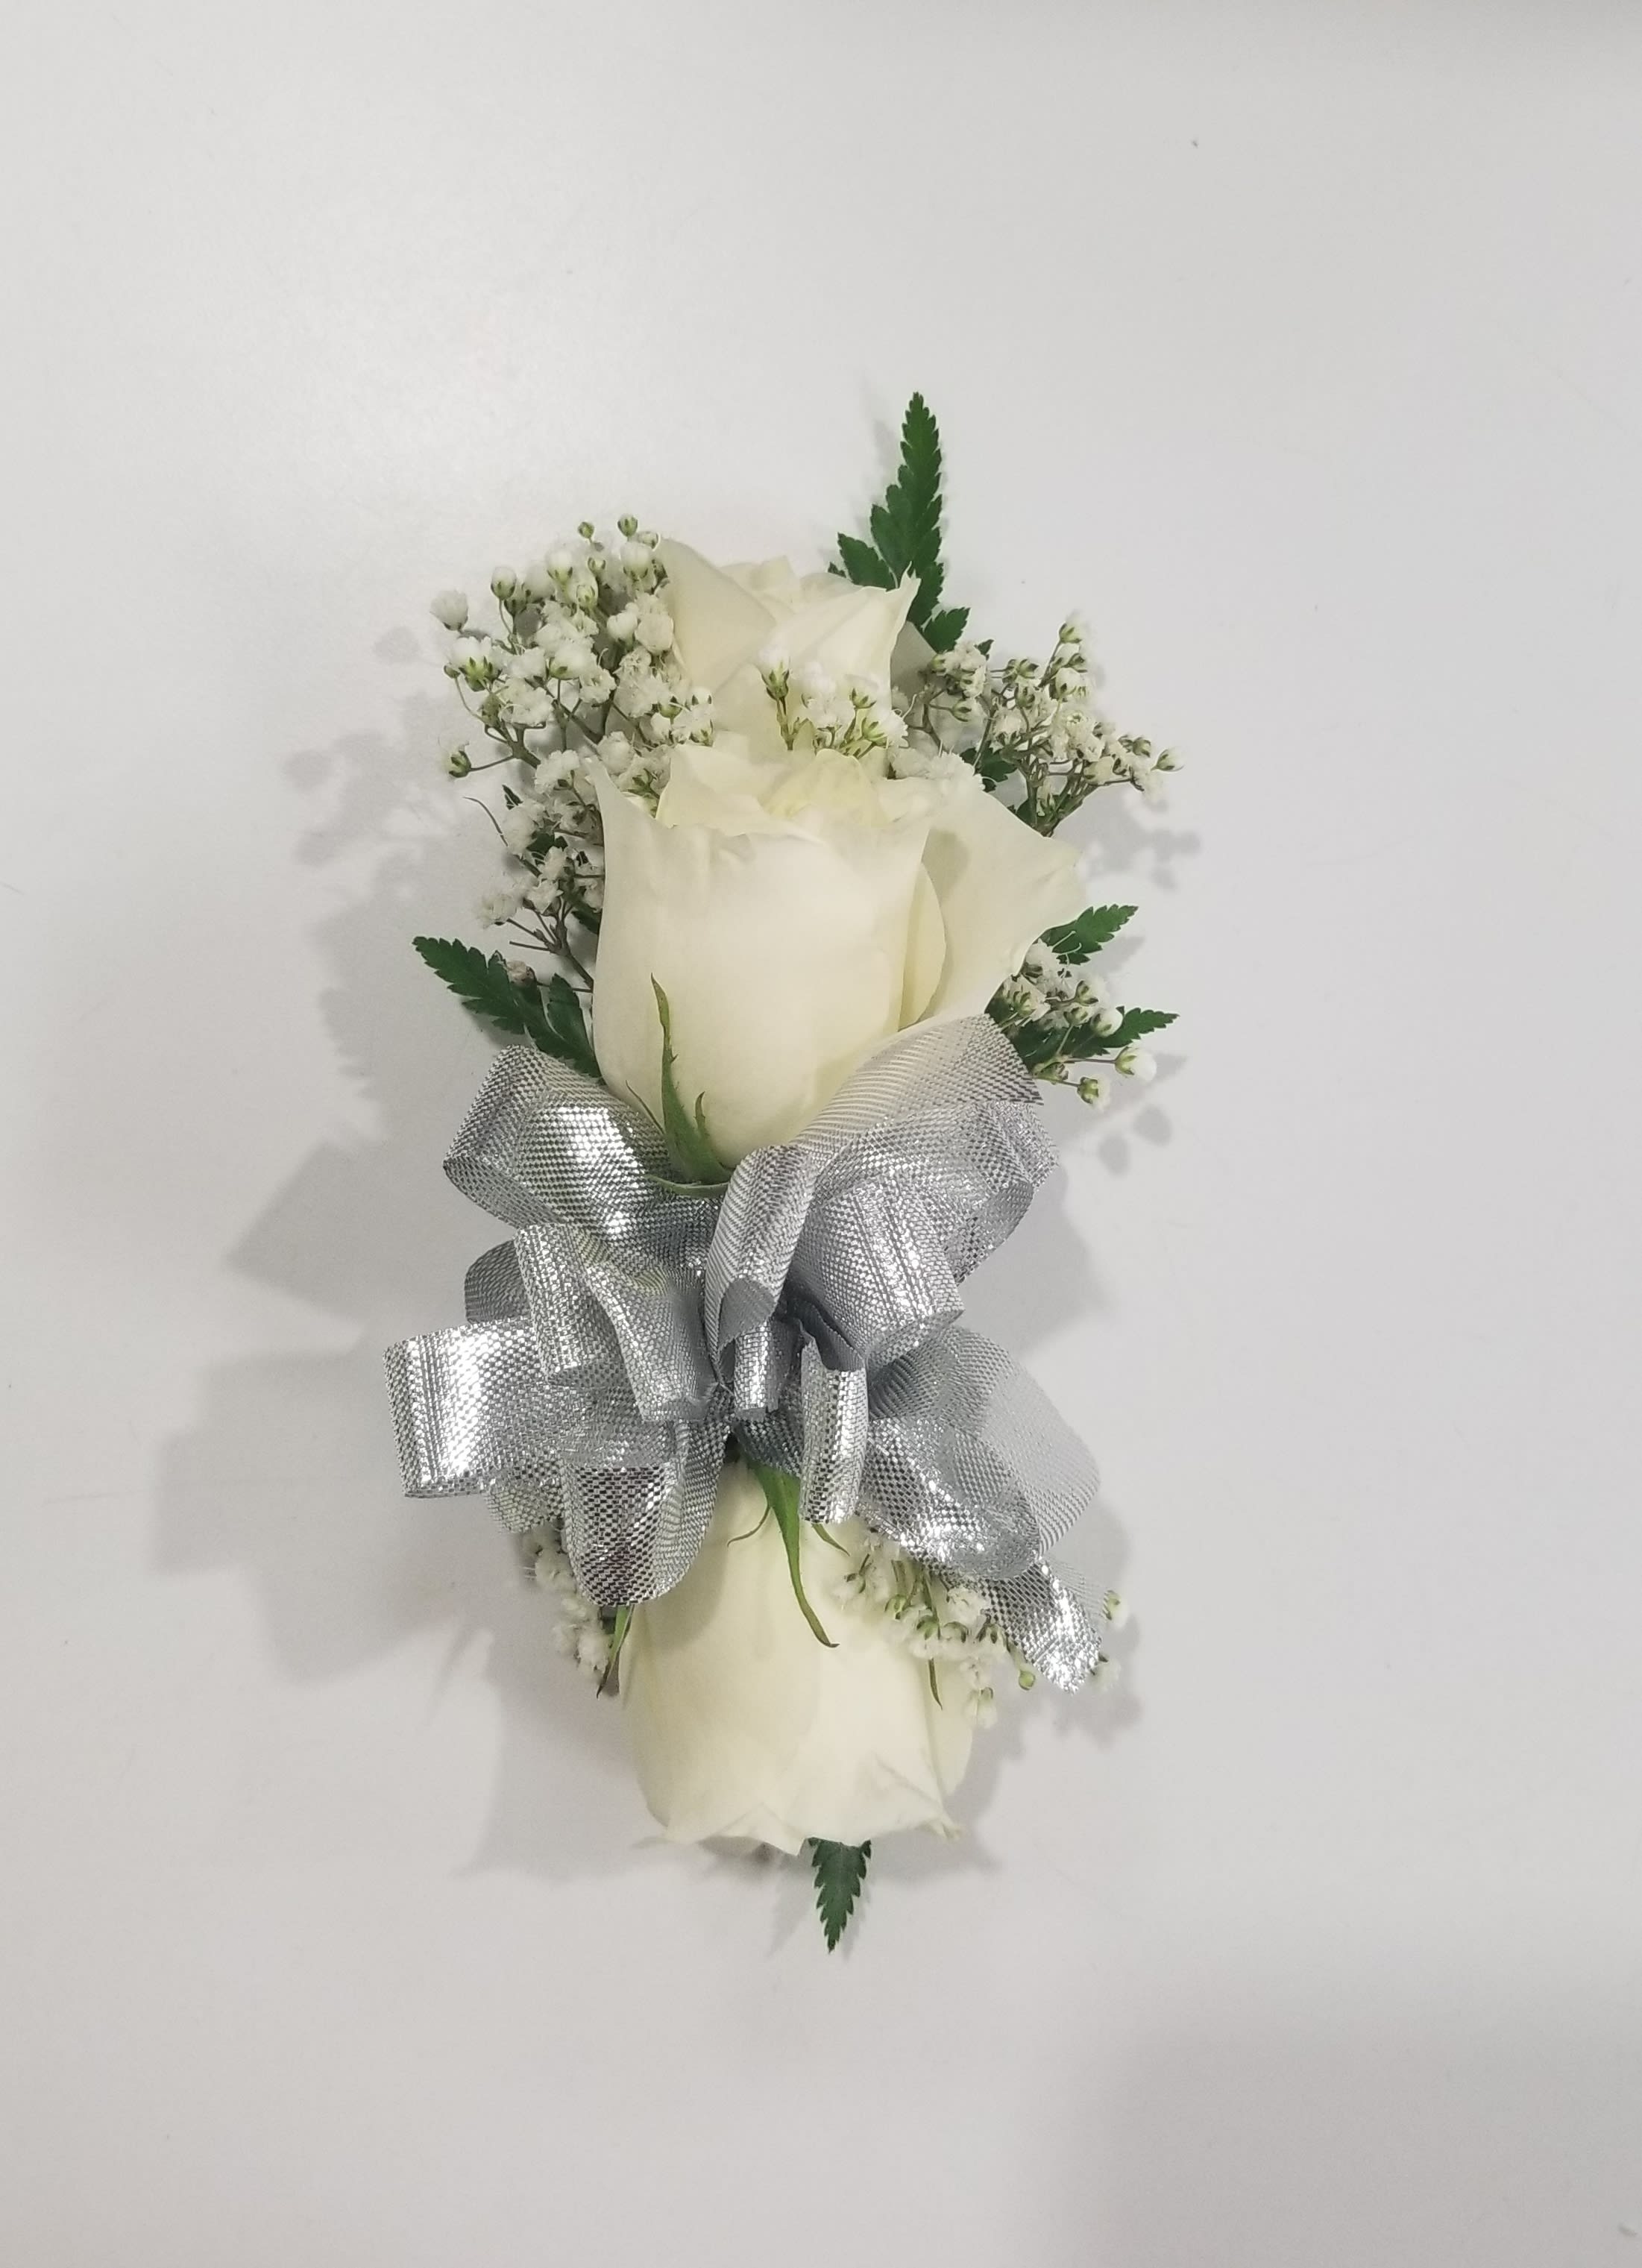 White Rose Wrist Corsage with Silver Bow - This is a beautiful, simple wrist corsage that comes dressed with greens, baby's breath and a silver bow. It is great for proms, wedding, and events. 